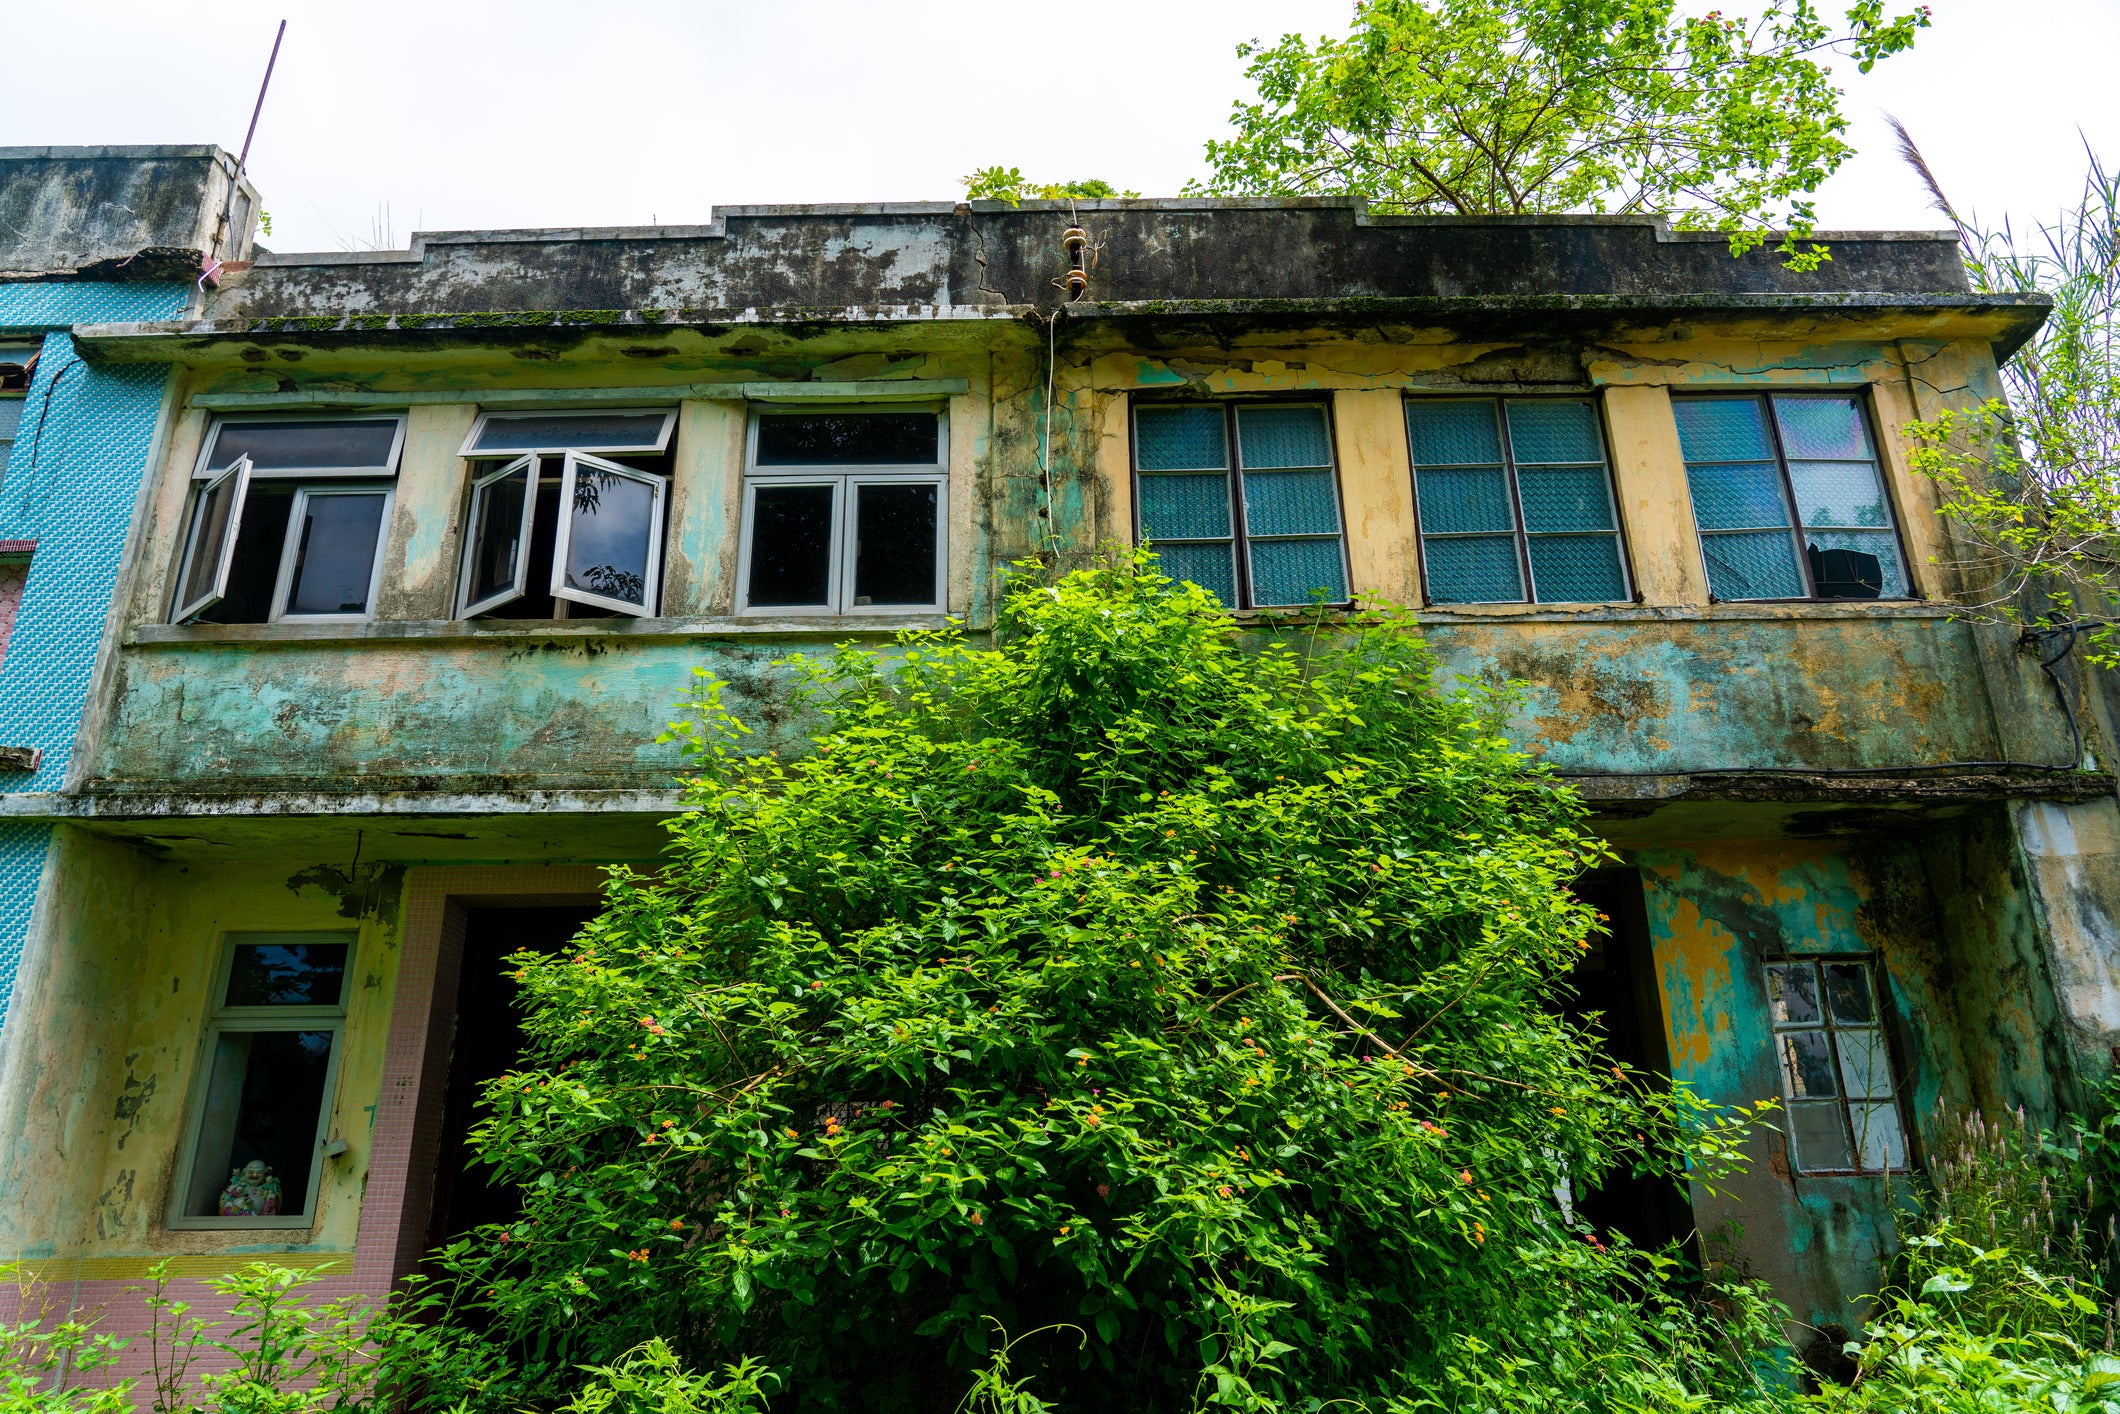 Abandoned houses in Hong Kong. Scientists say we need to examine the bad-to-worst-case climate scenarios more closely